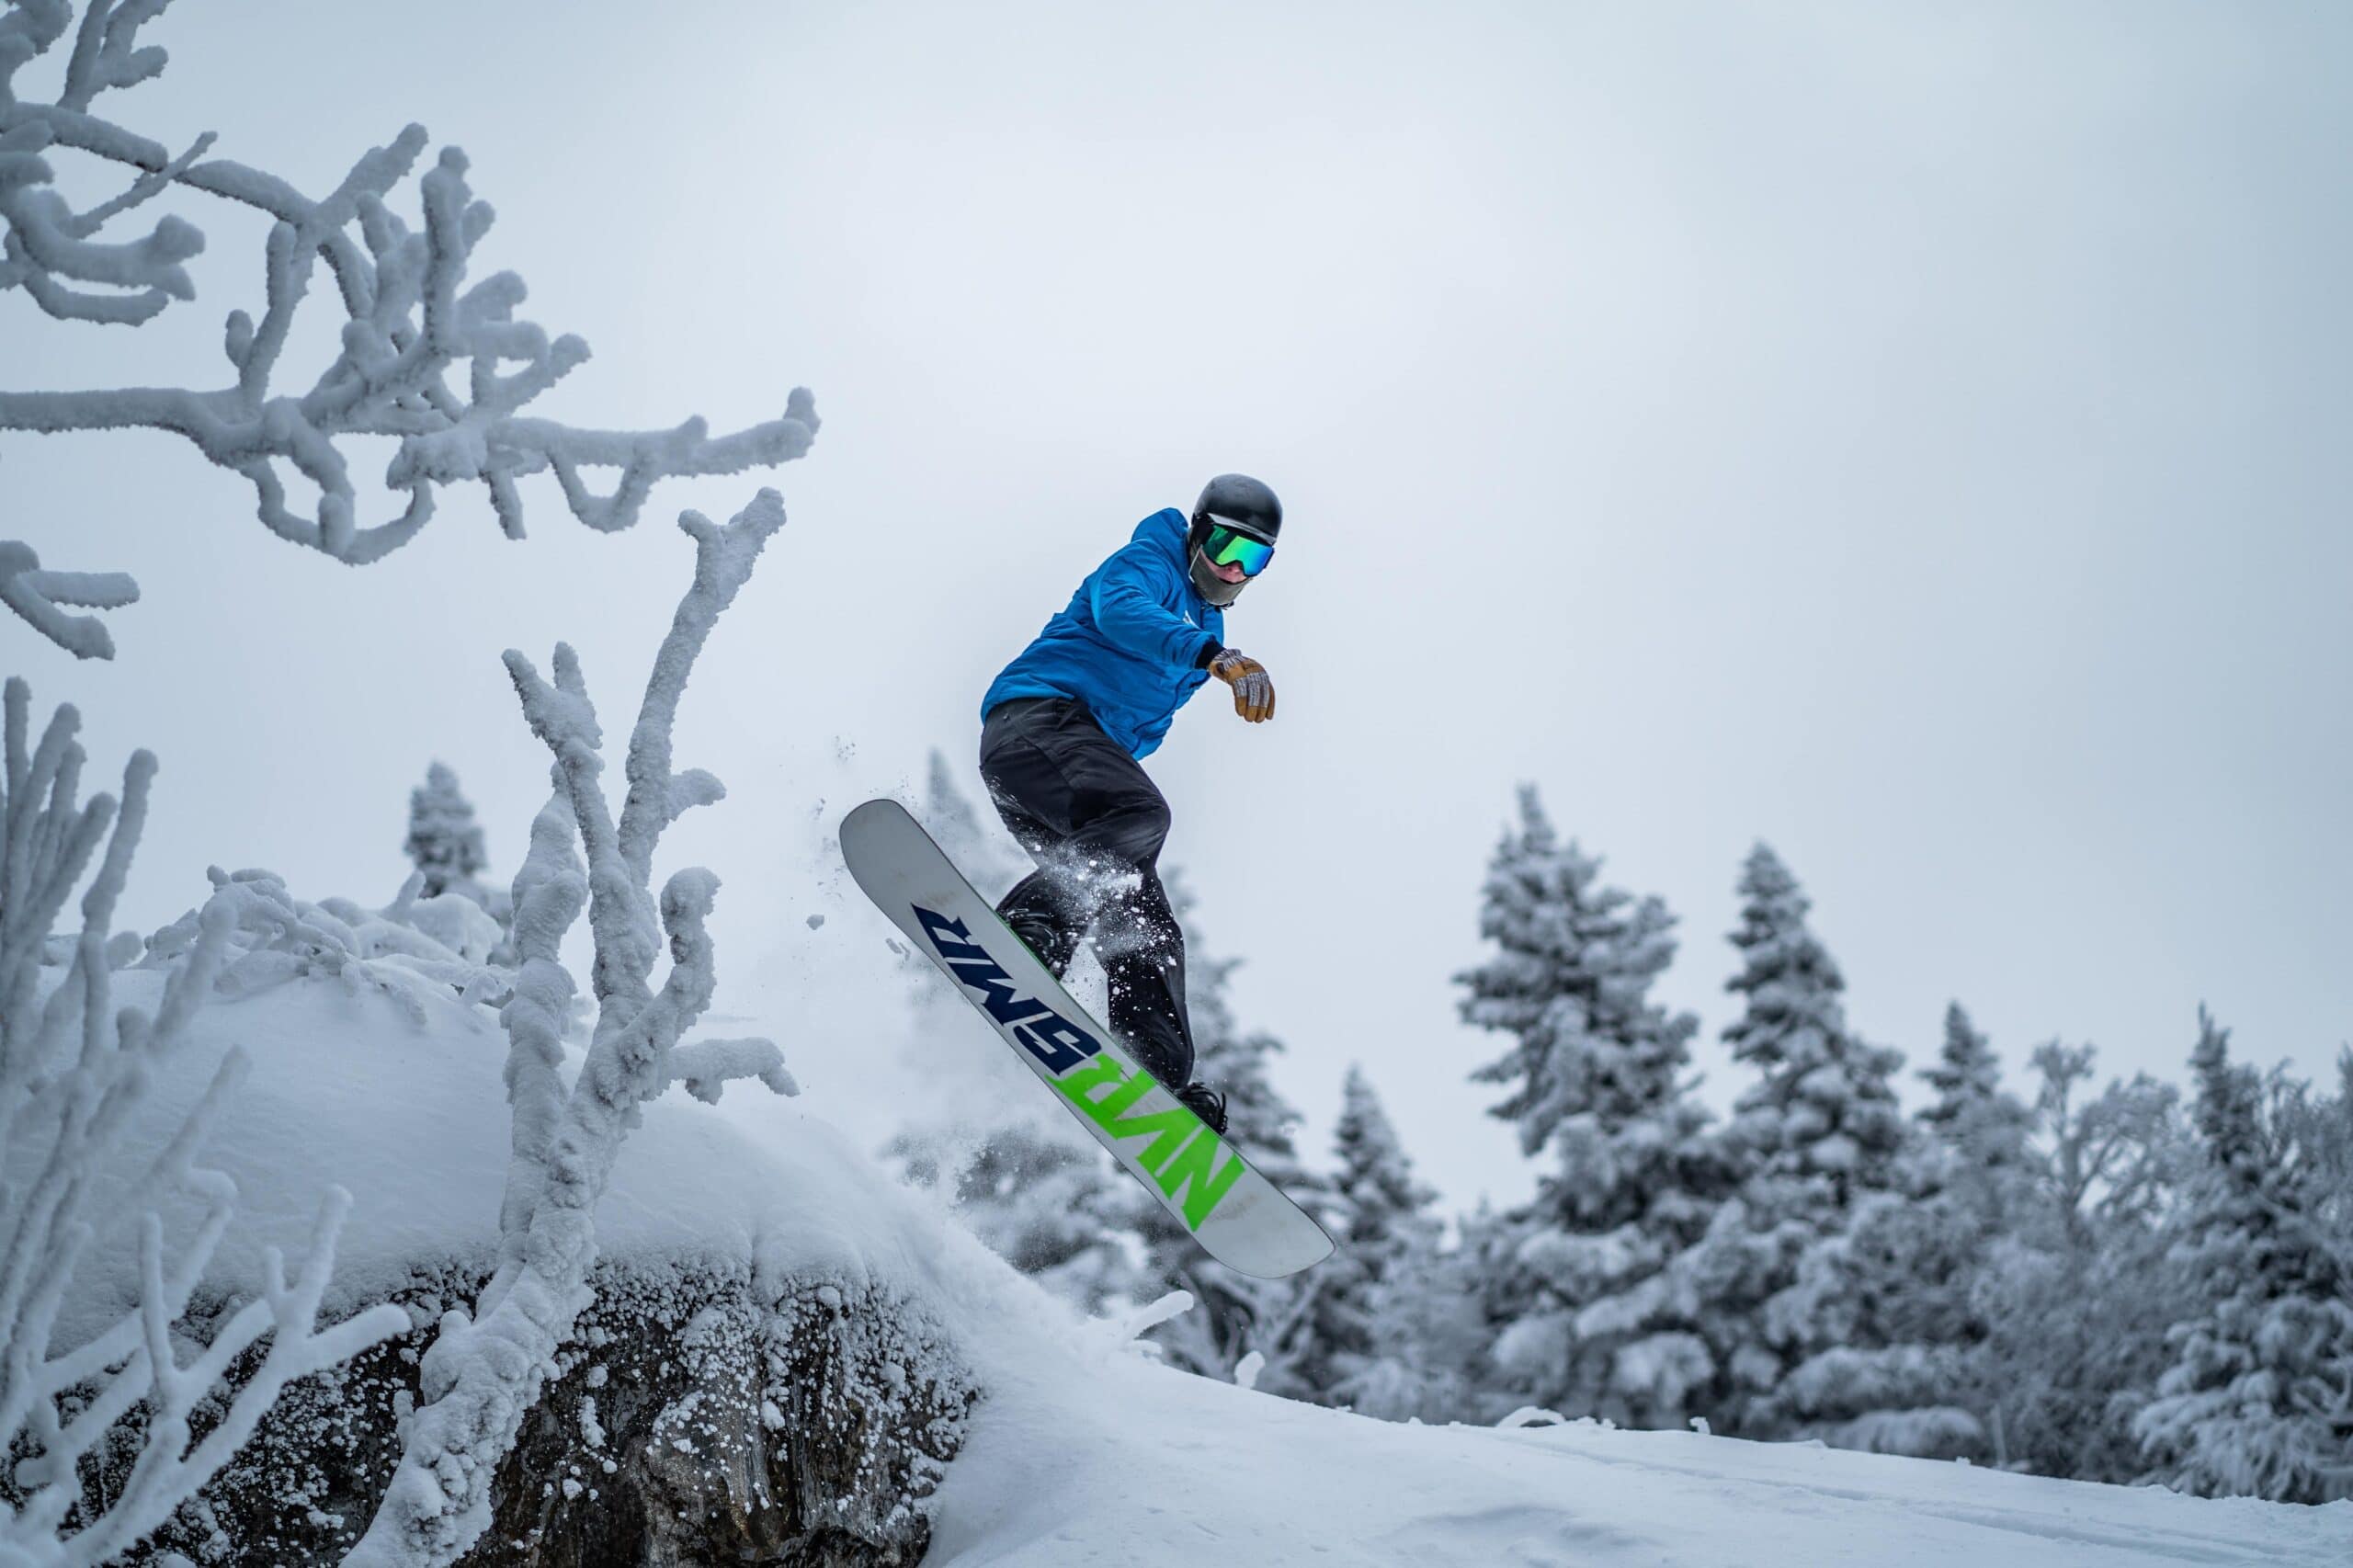 A snowboarder flying through the air over a mound of fresh snow.